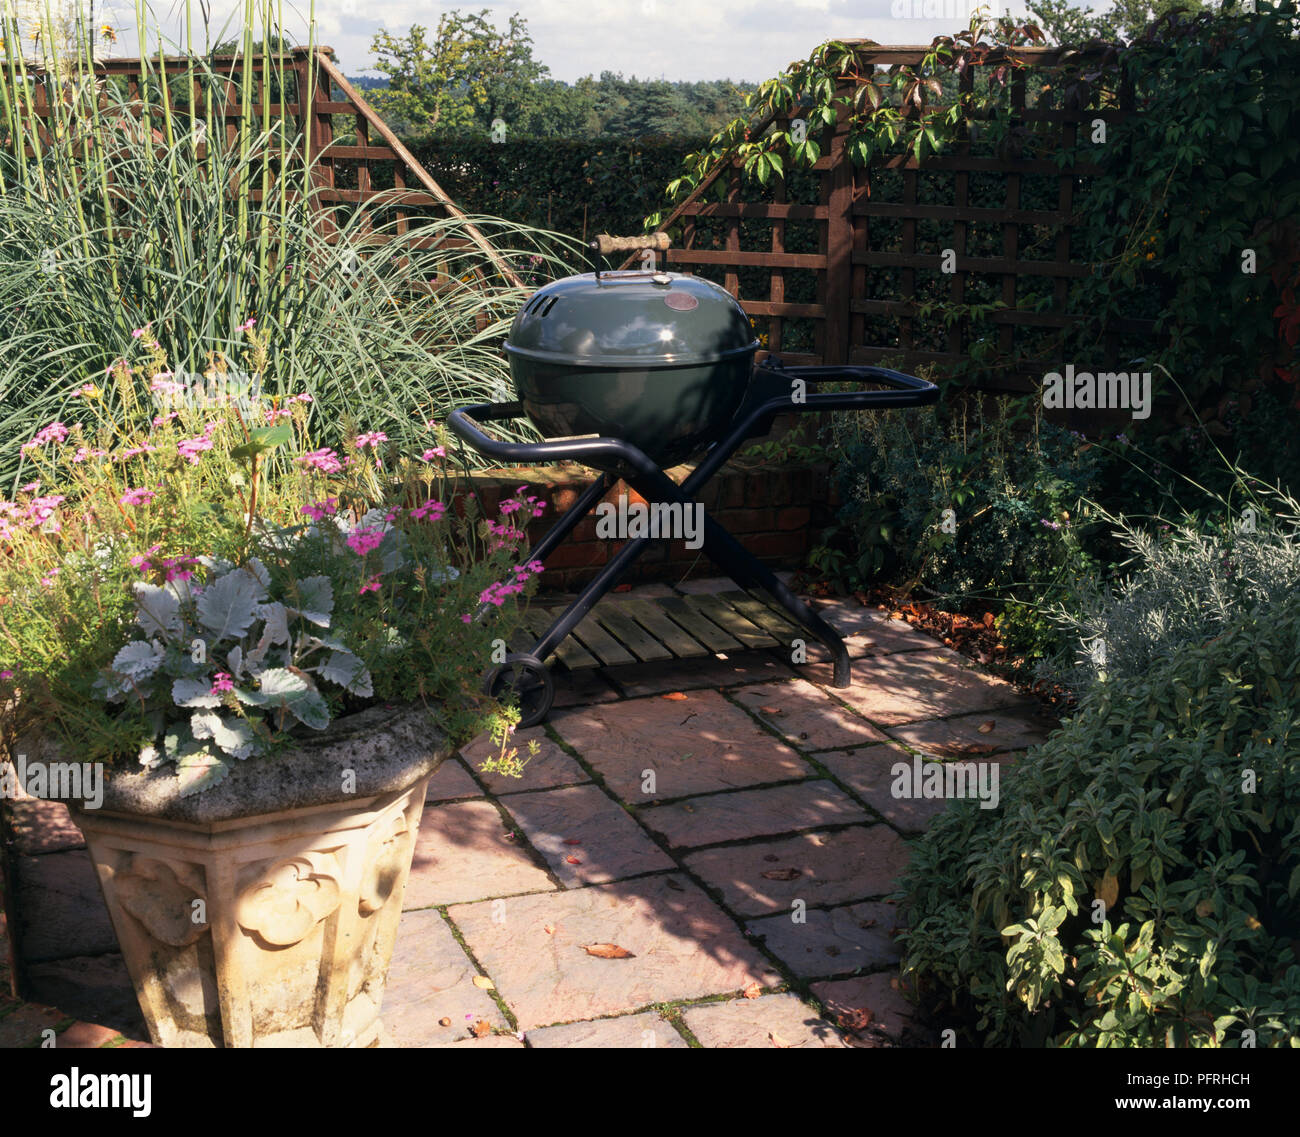 Small garden with portable barbecue standing on a patio surrounded by pot plants Stock Photo